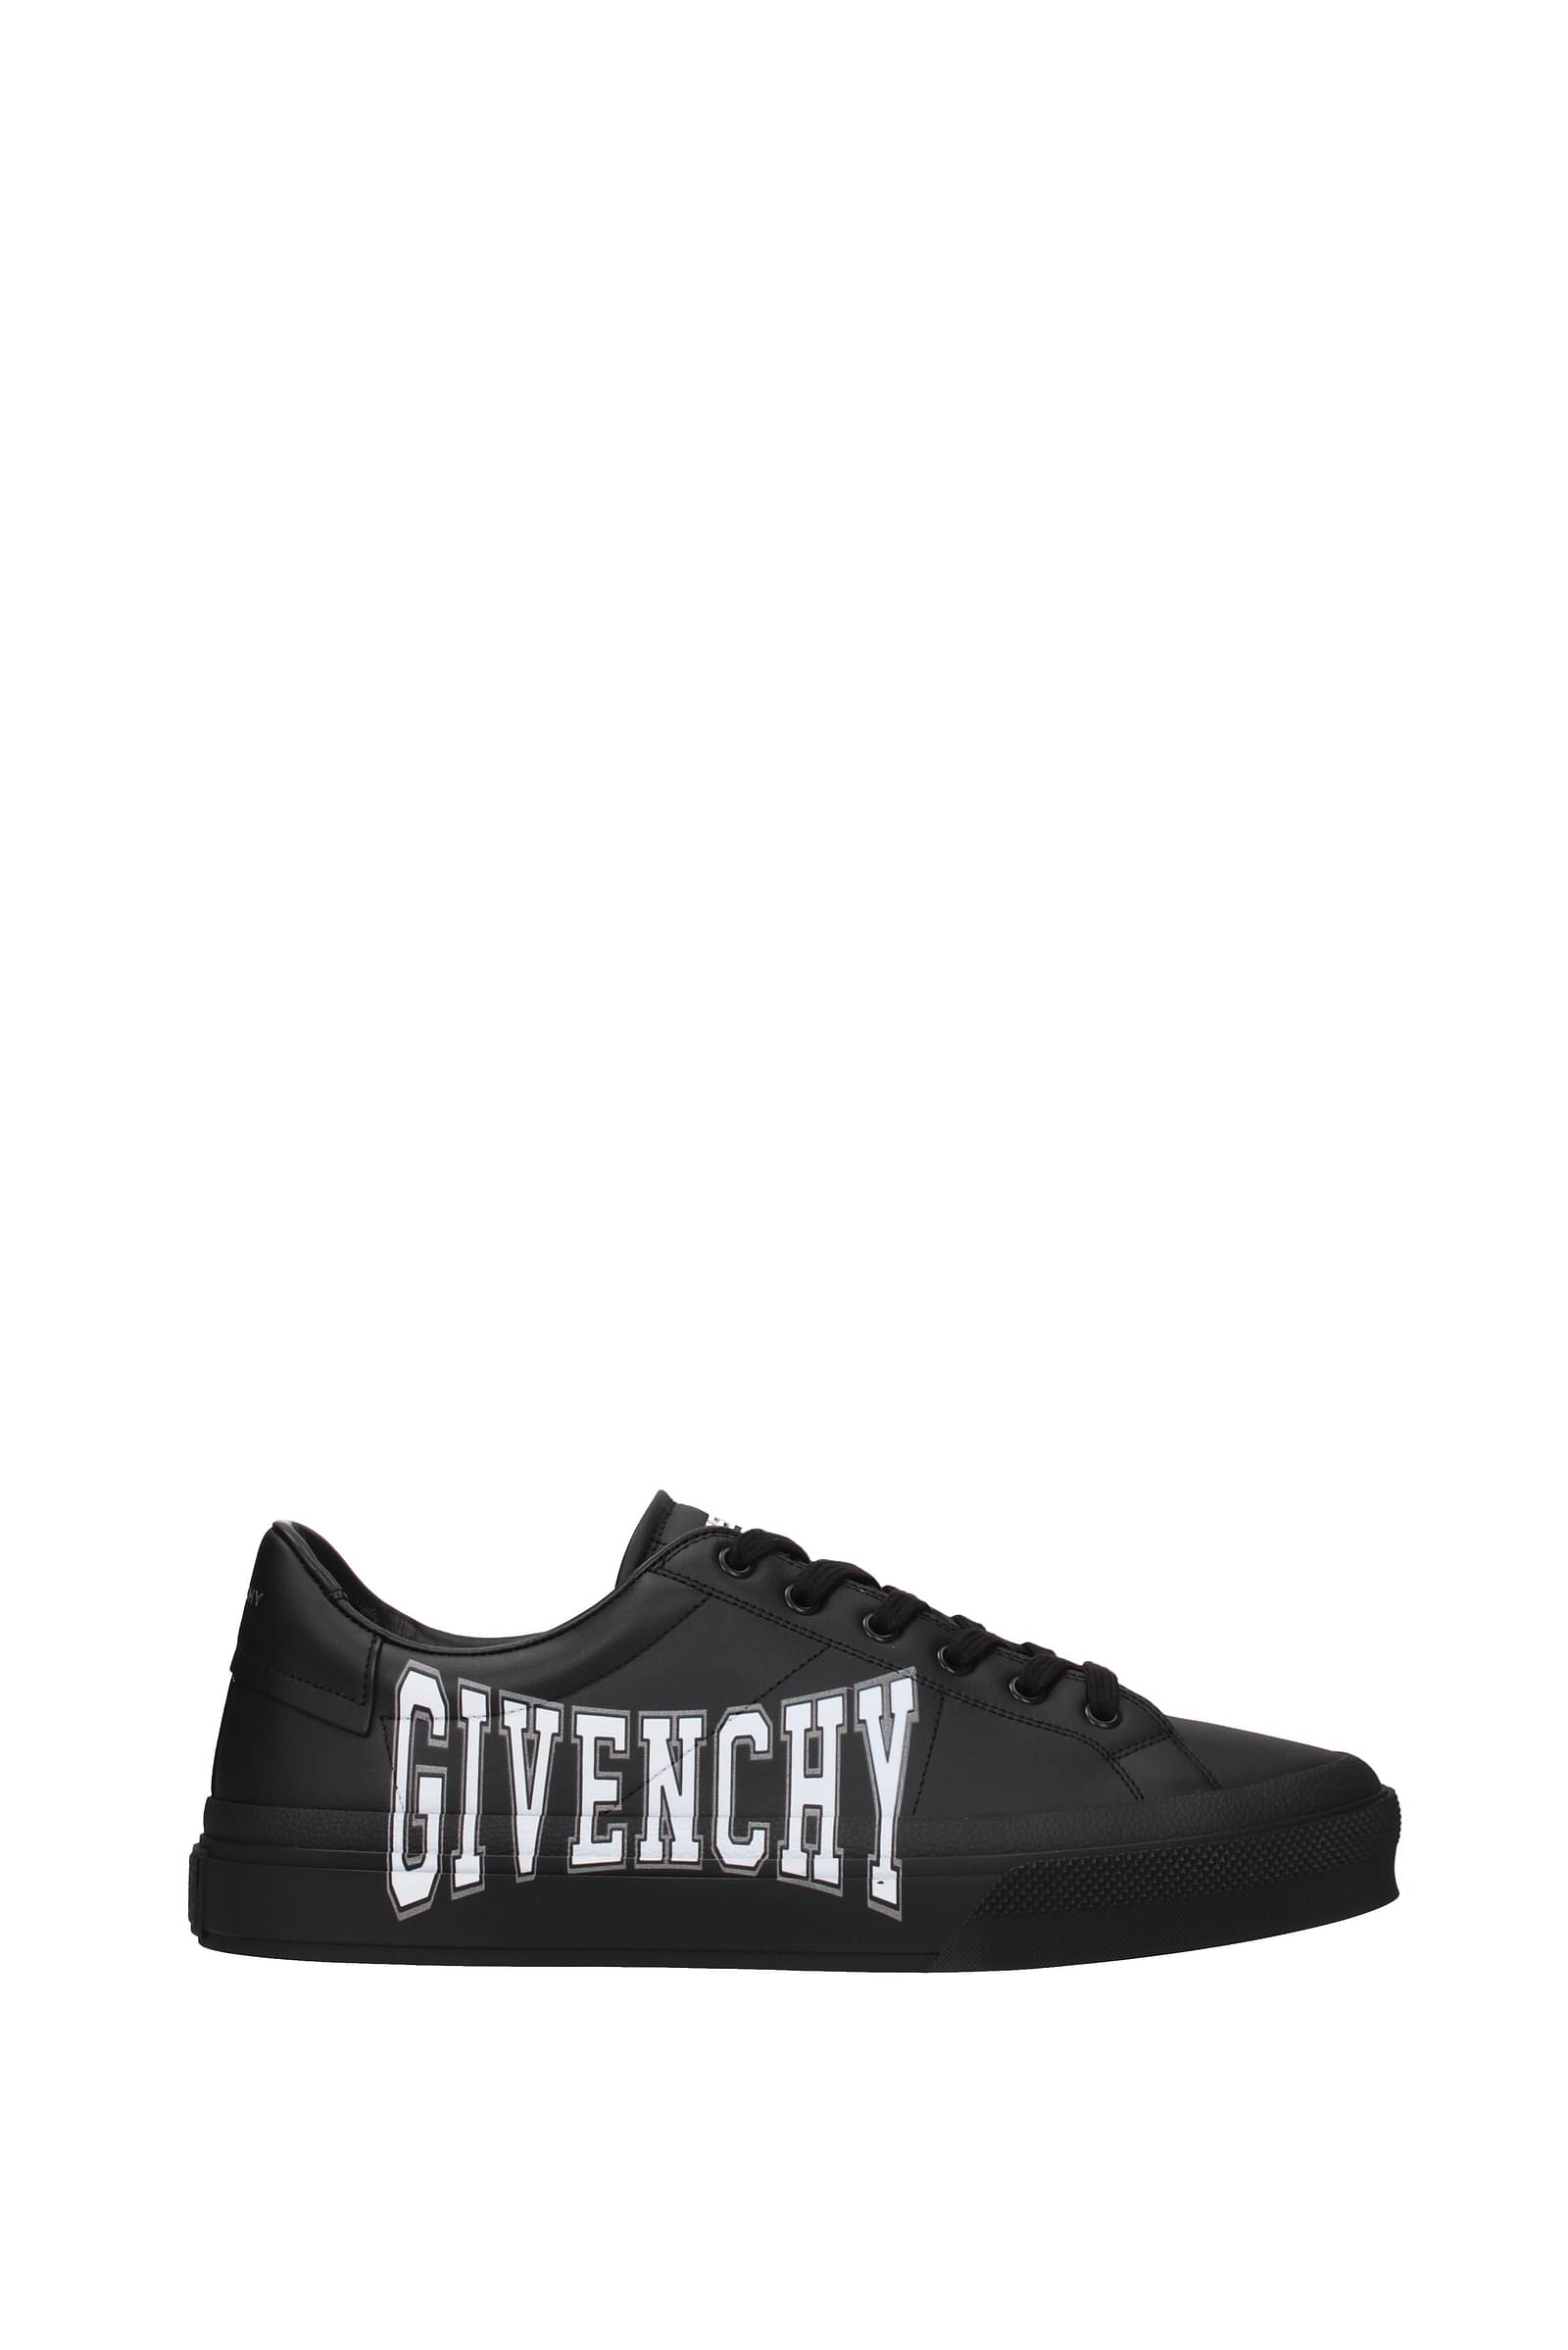 Givenchy City Sport Leather Black / White Low Top Sneakers - Sneak in Peace